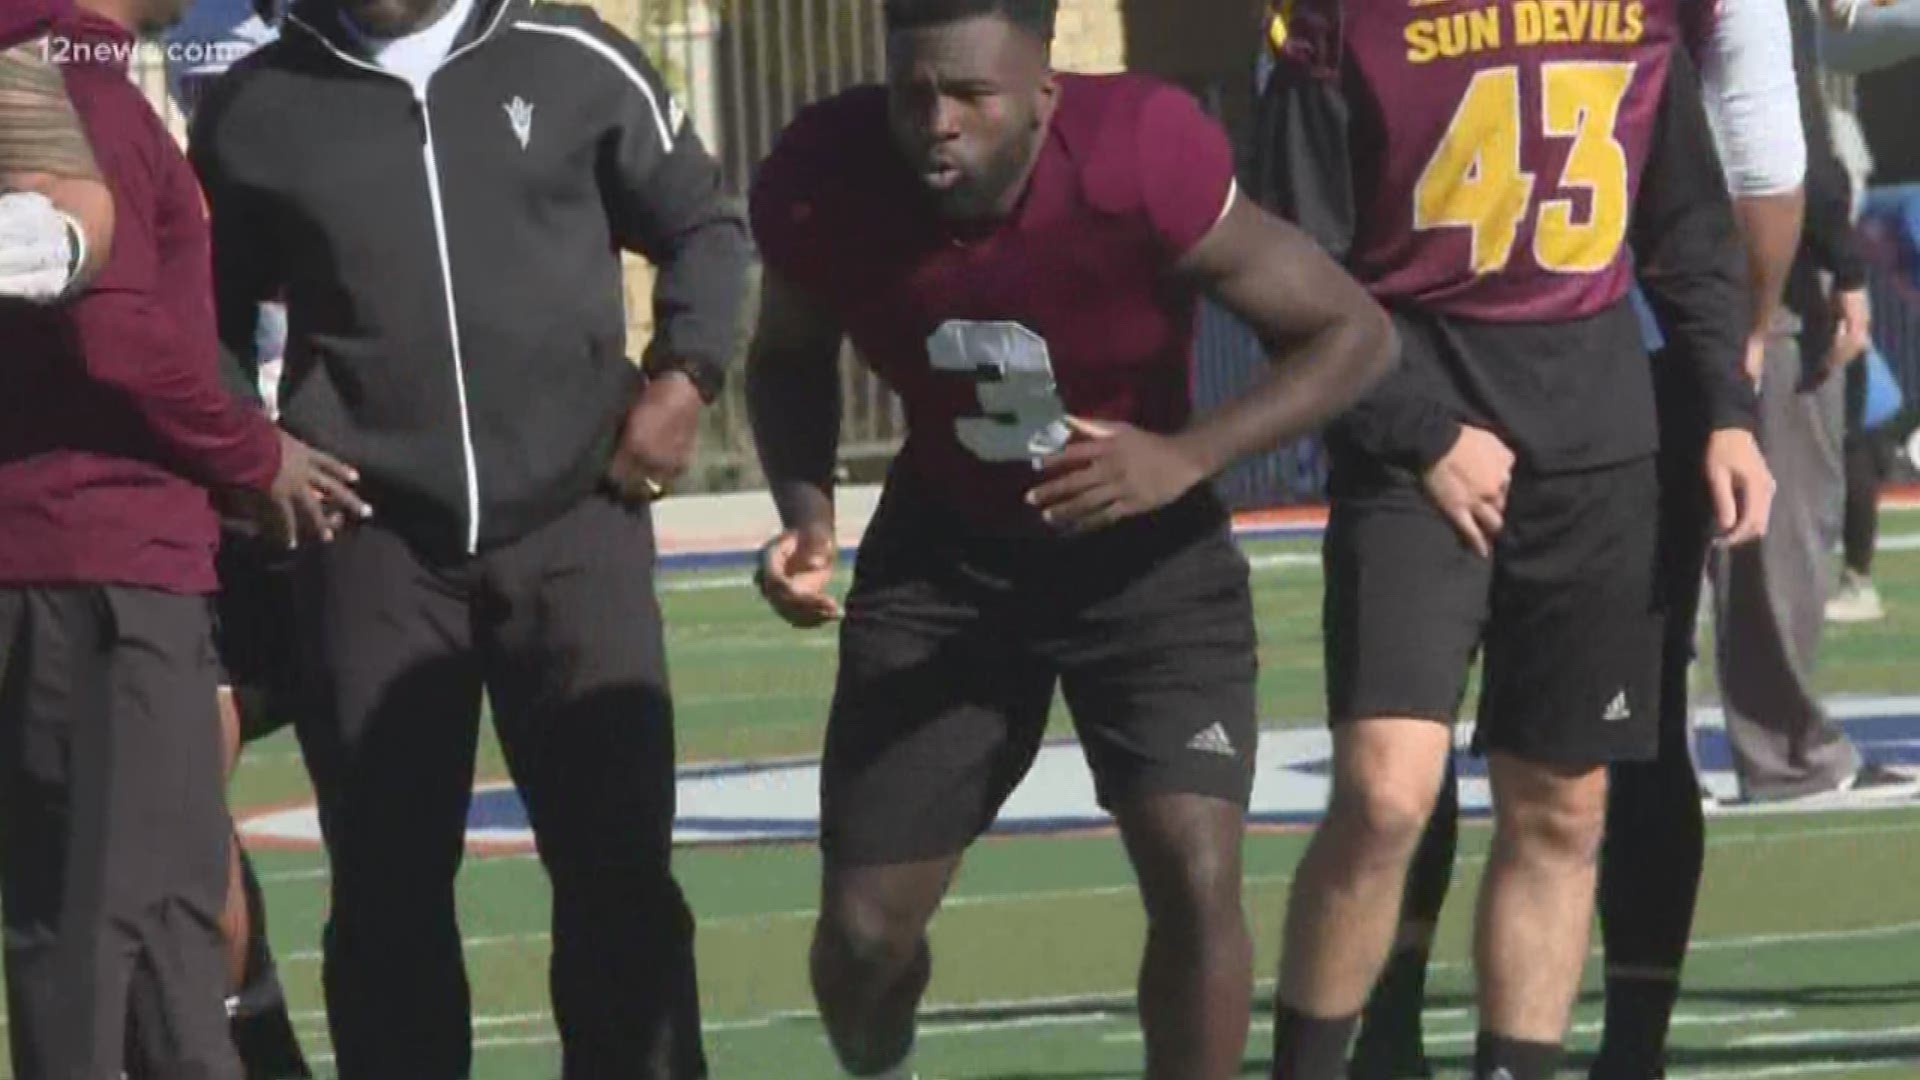 The Sun Devils are in Vegas prepping for their bowl game. We caught up with some of the players who are playing as hard as they working on the famous Vegas Strip!